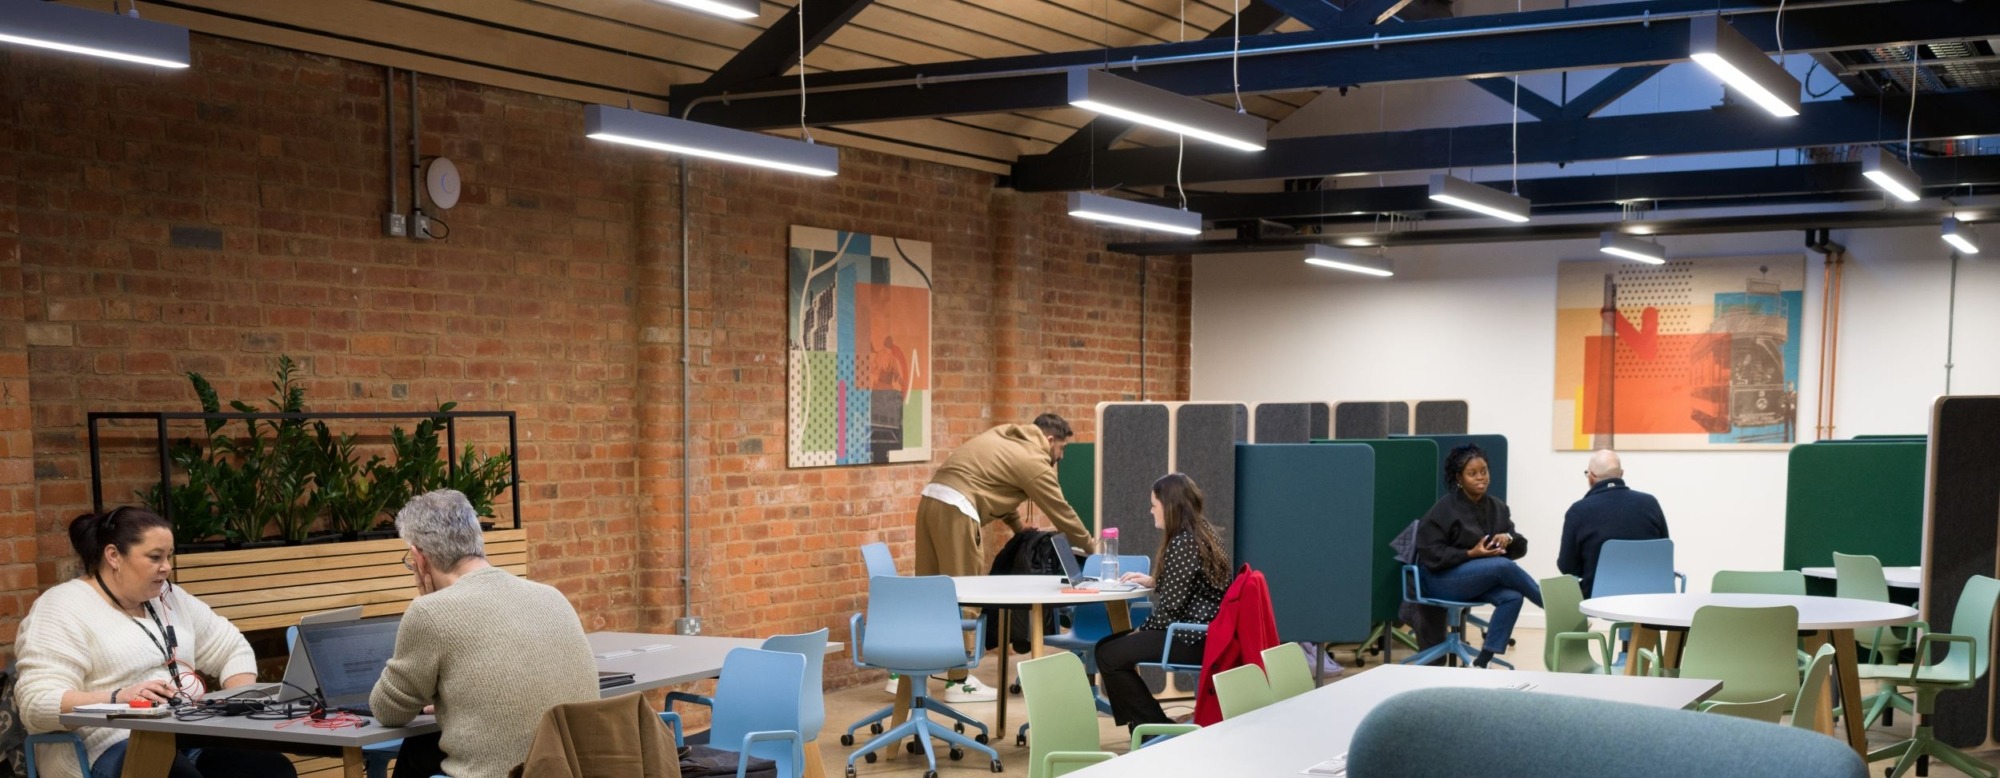 New flexible coworking options for creative businesses | Northamptonshire Chamber of Commerce